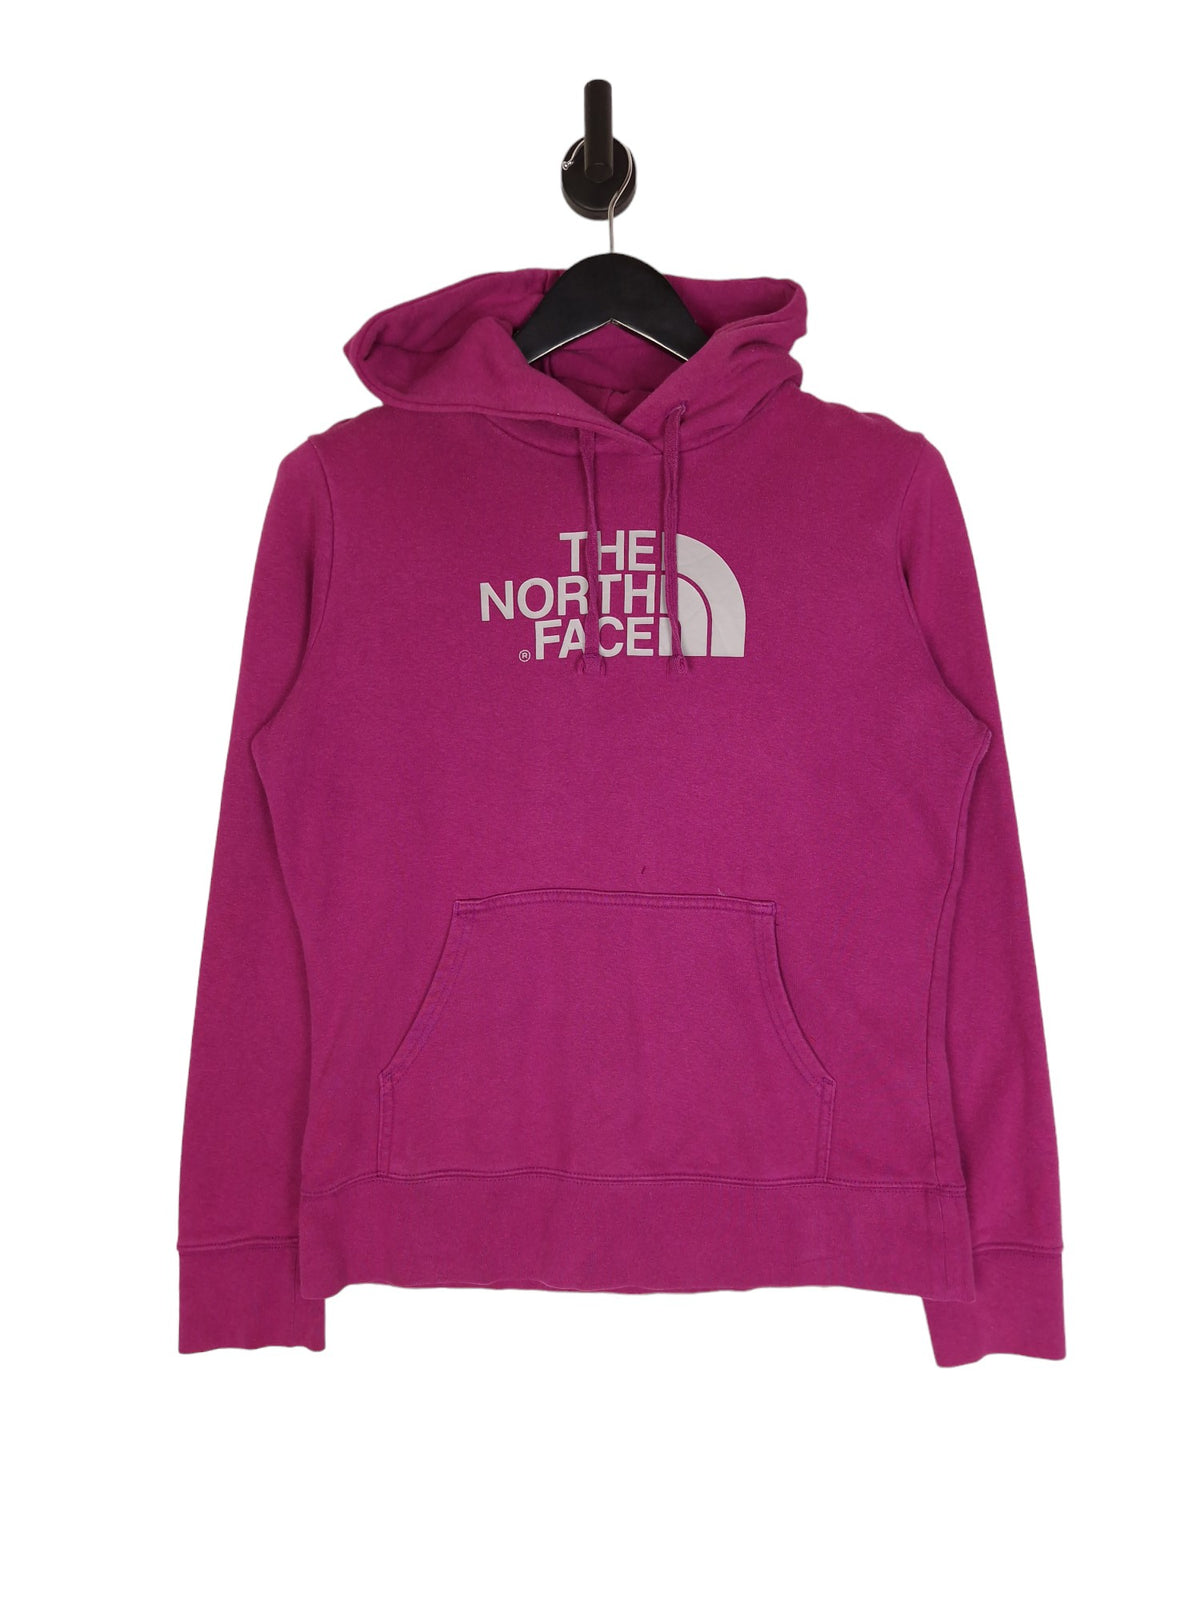 The North Face Hoodie - Size UK 10